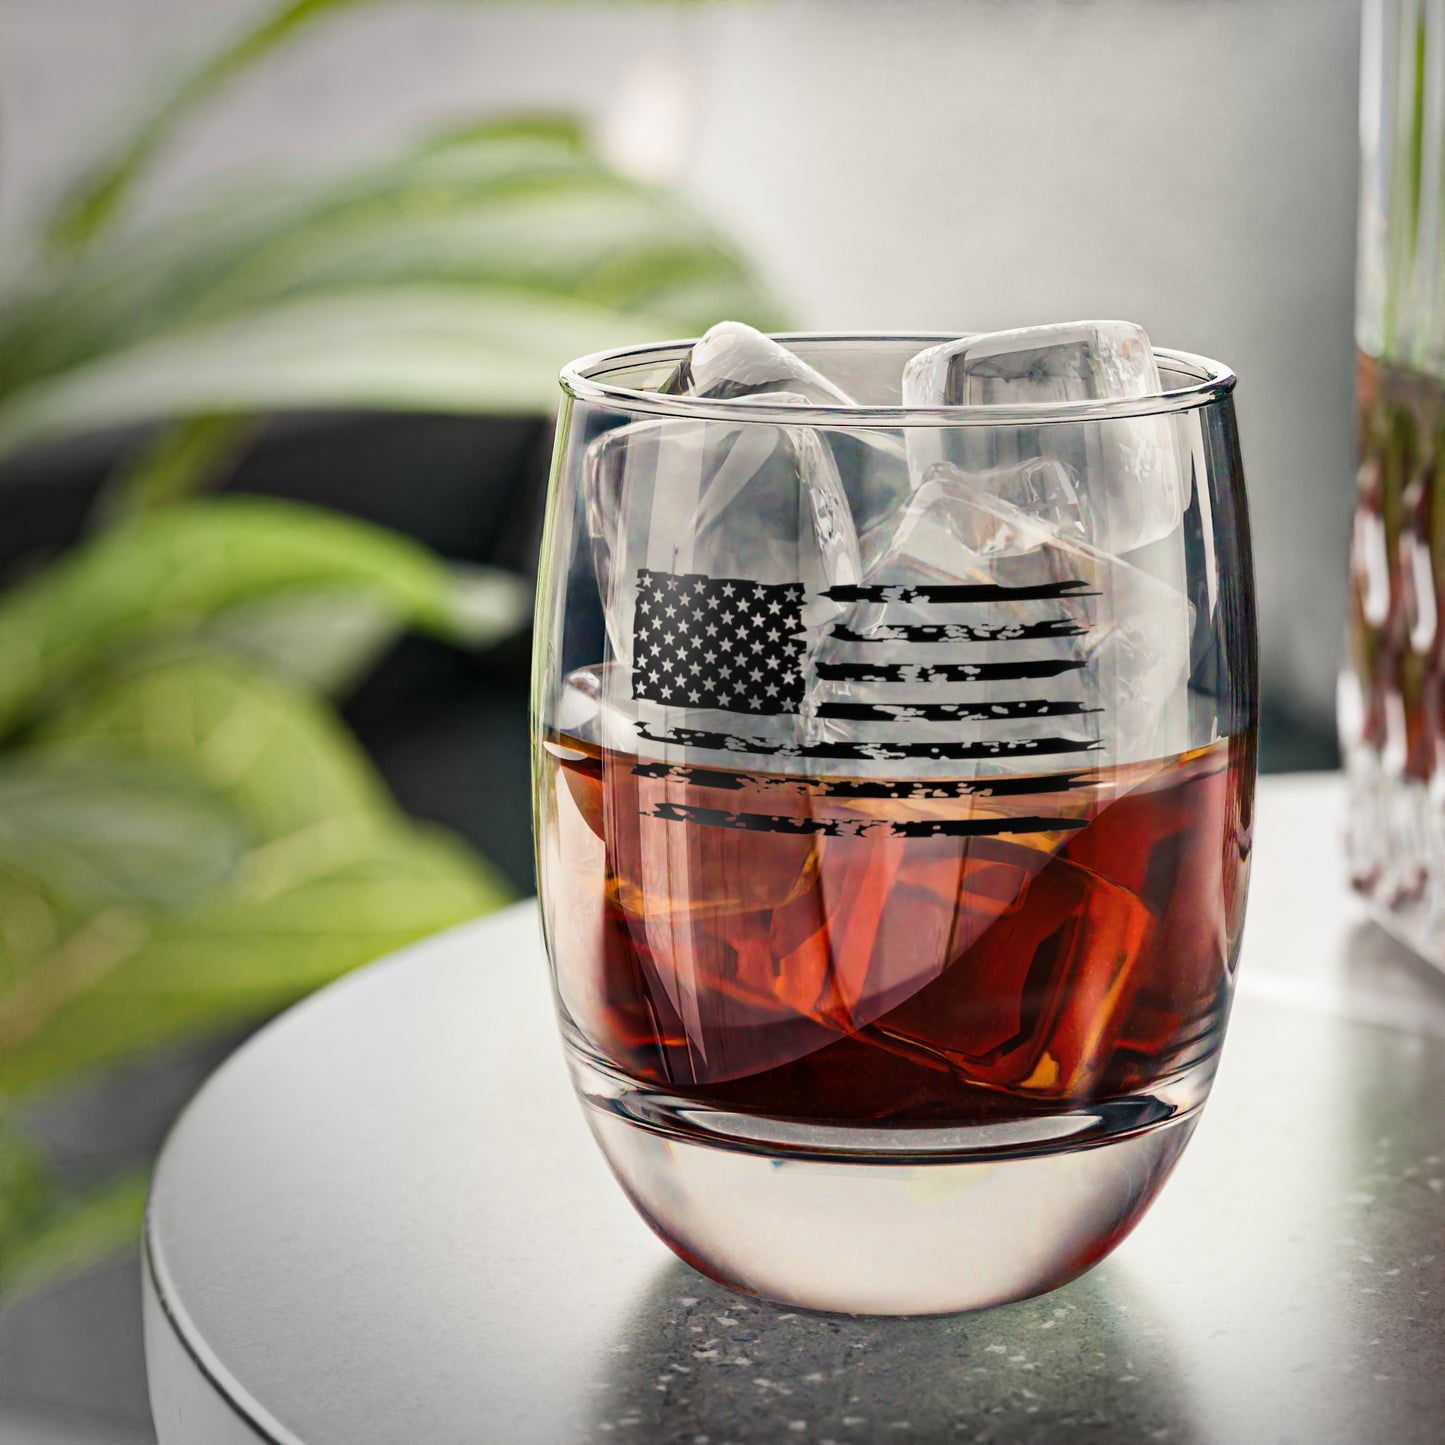 The Old Glory Whiskey Glass